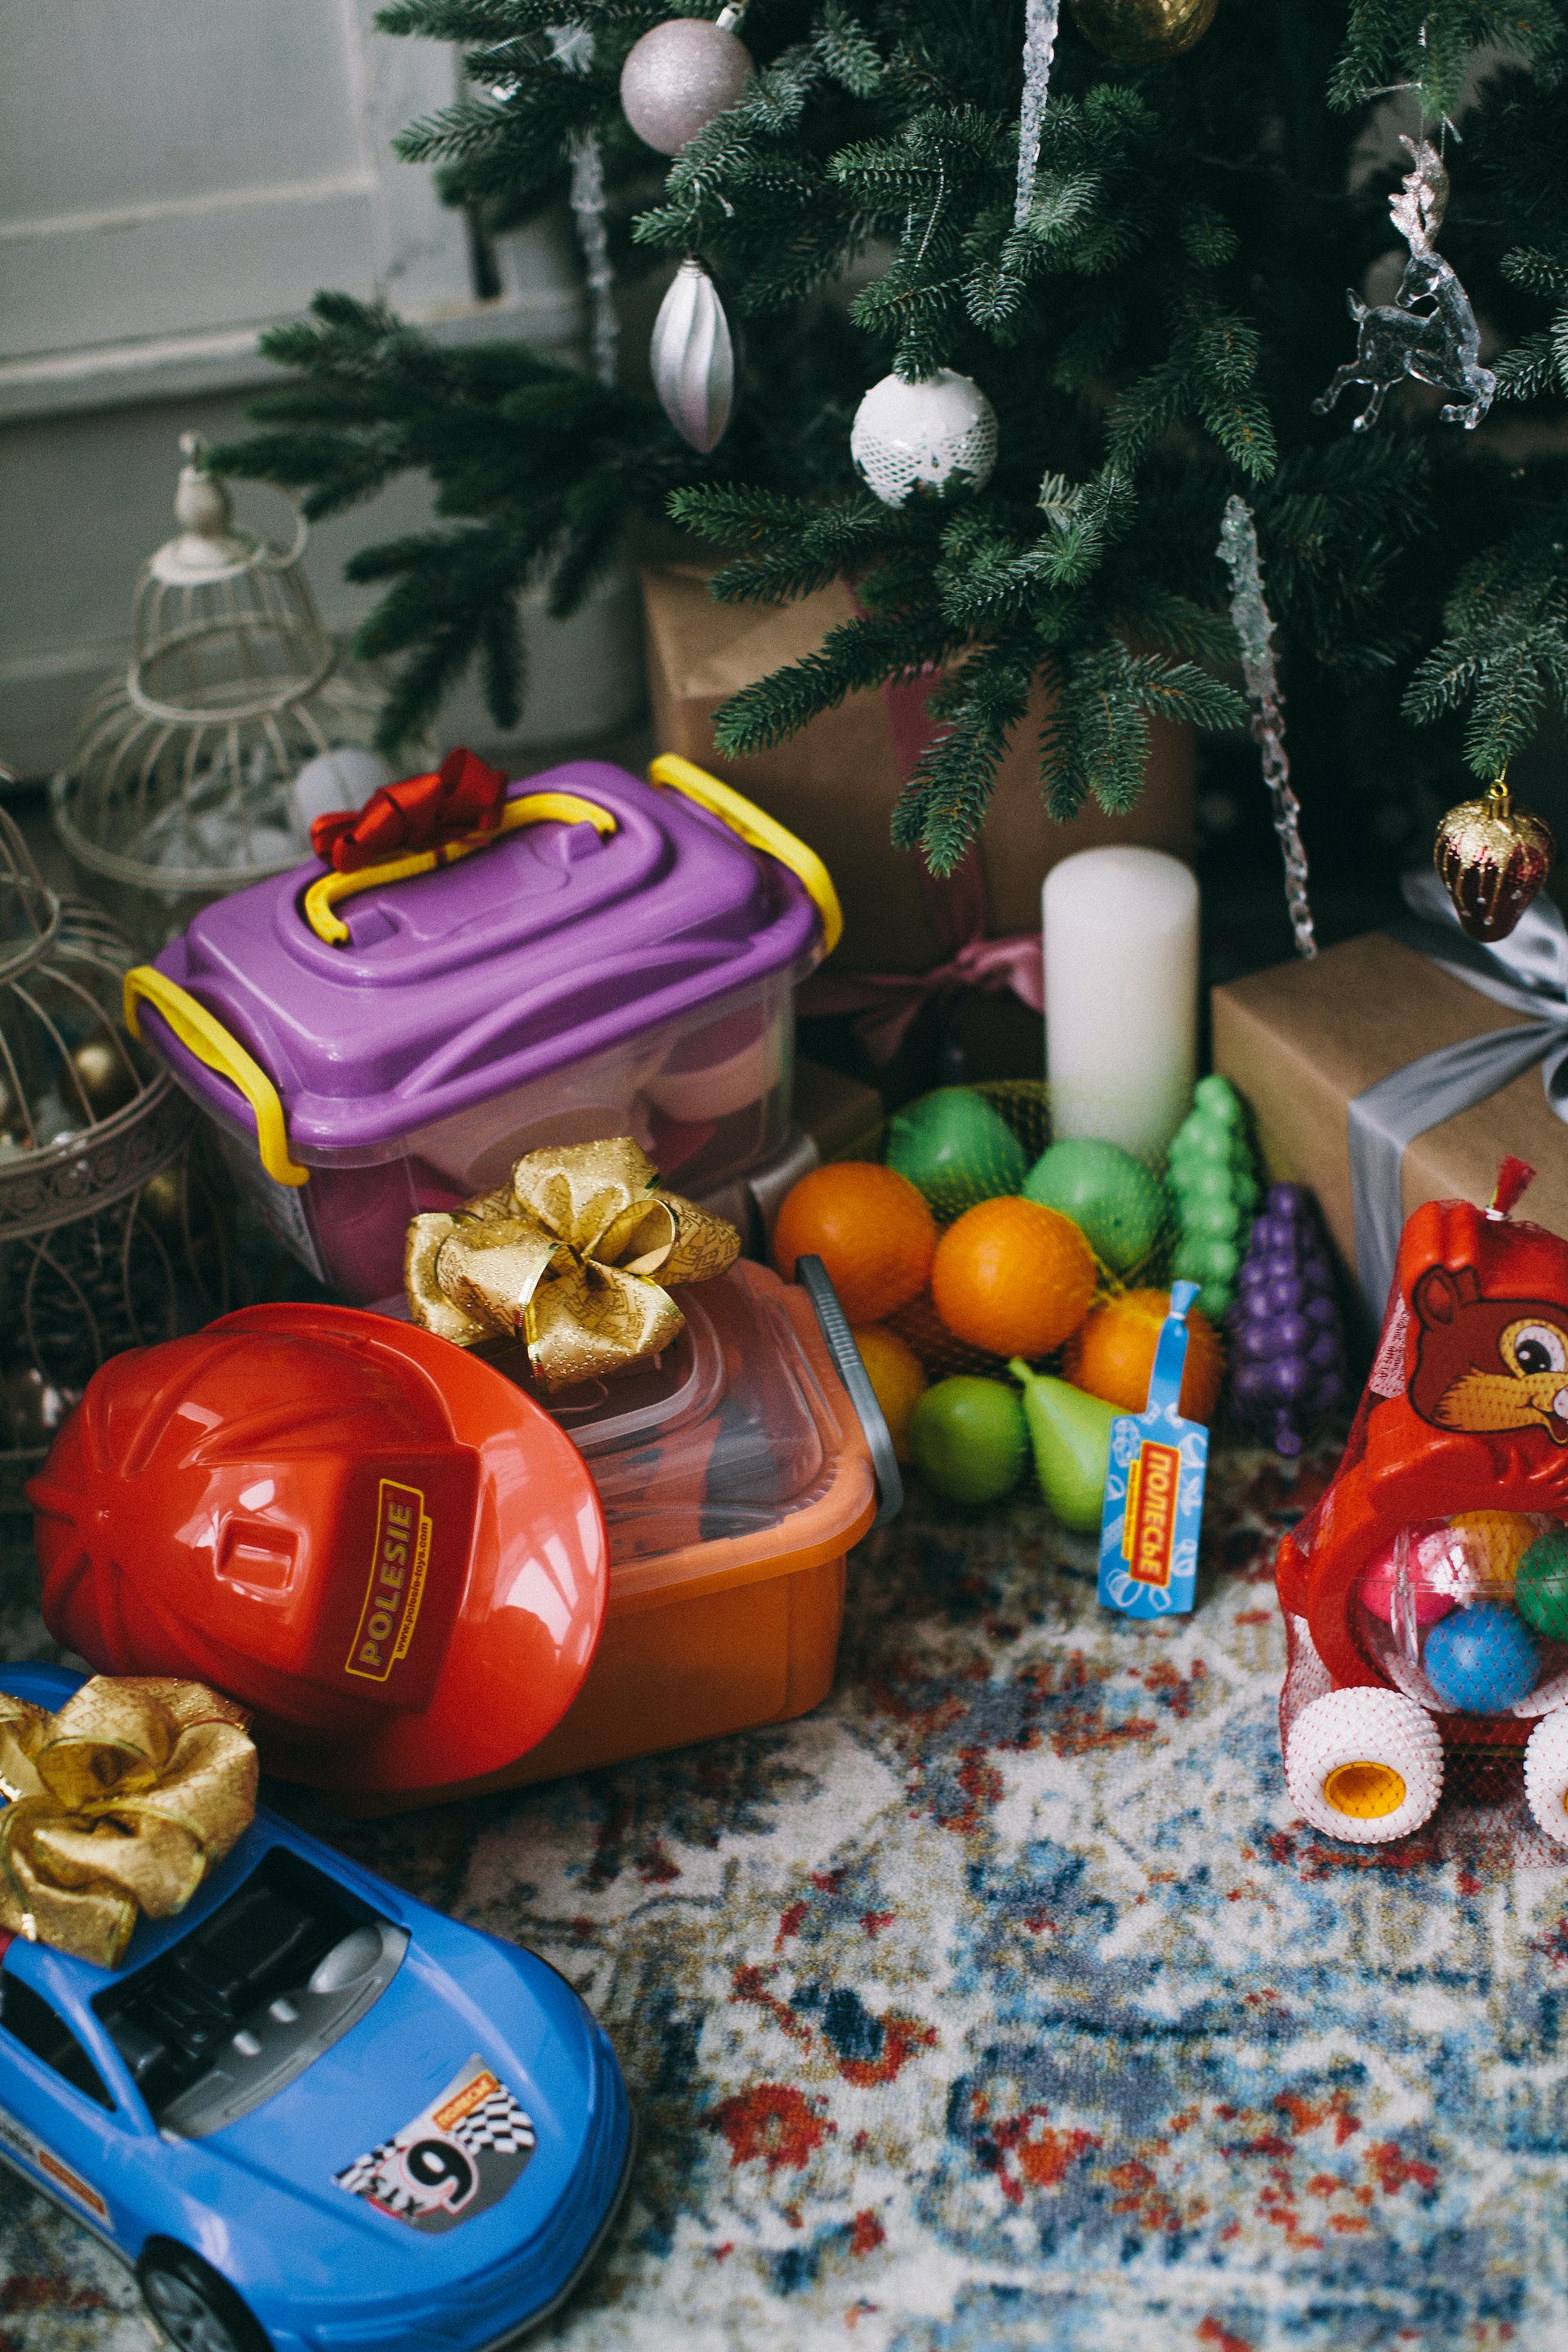 Children's toys placed under a Christmas tree | Source: Pexels